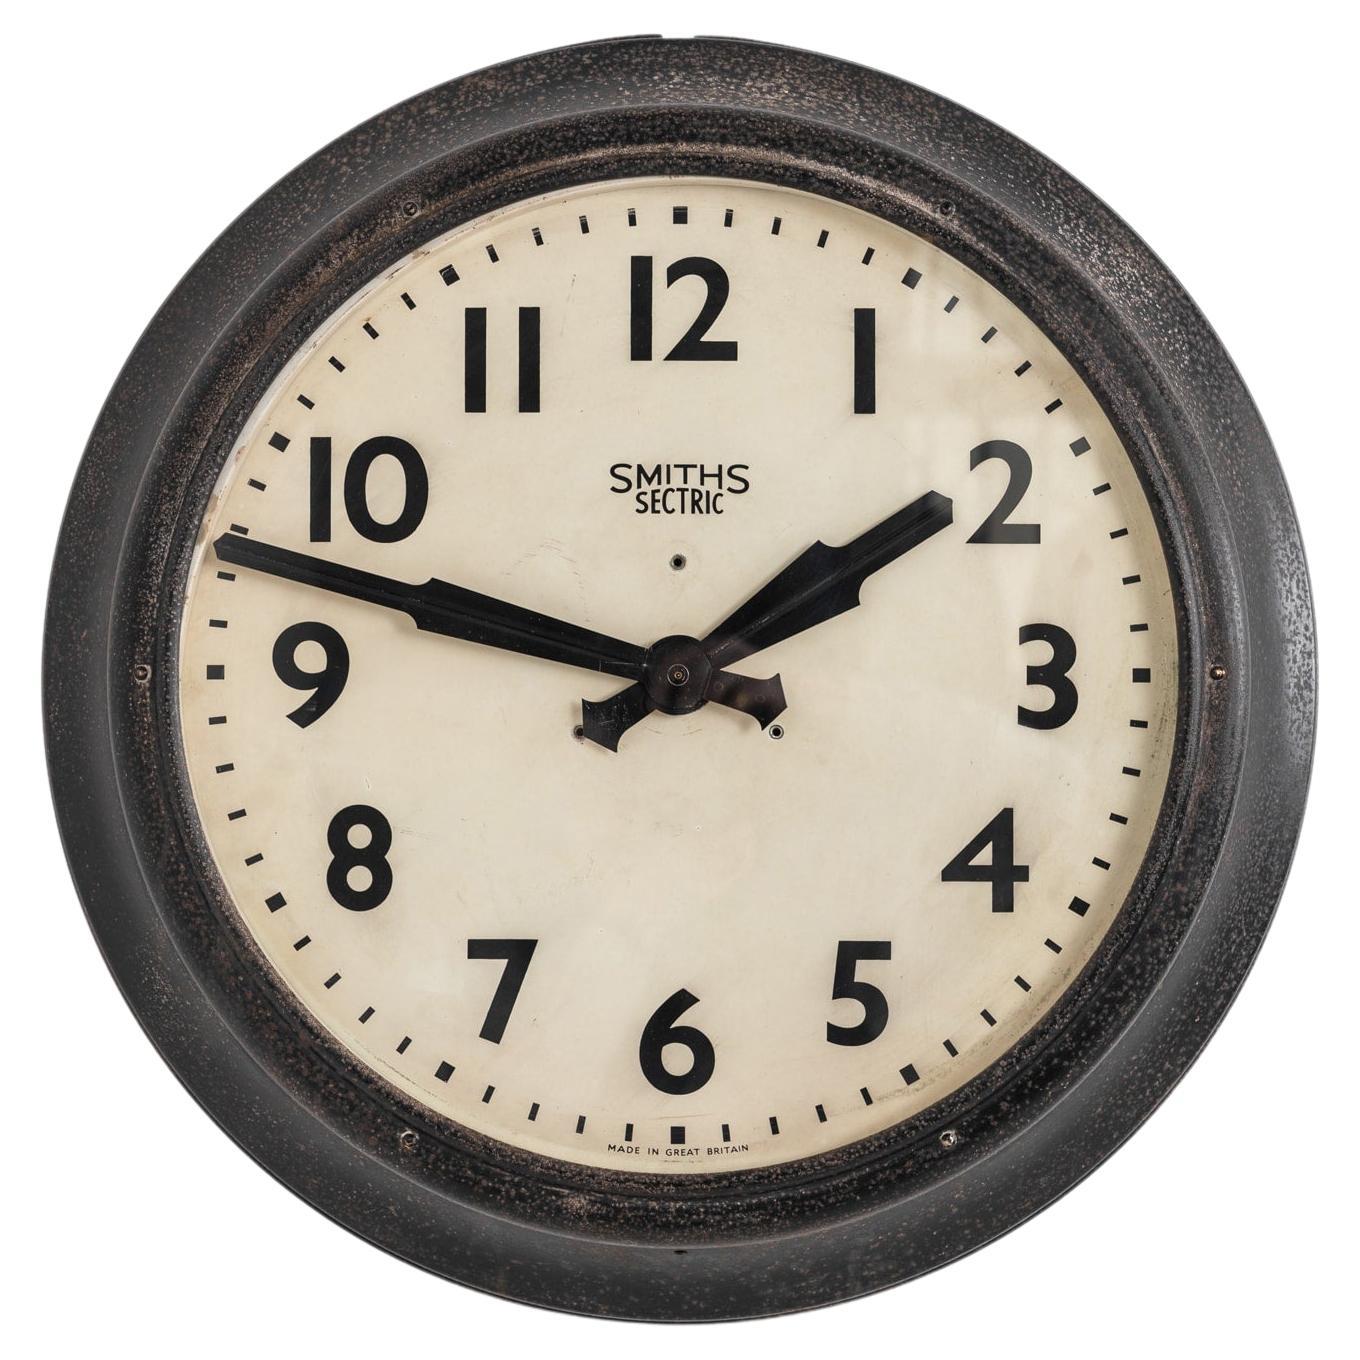 Large Vintage Industrial Art Deco Metal Smiths Electric Wall Clock, circa 1950 For Sale